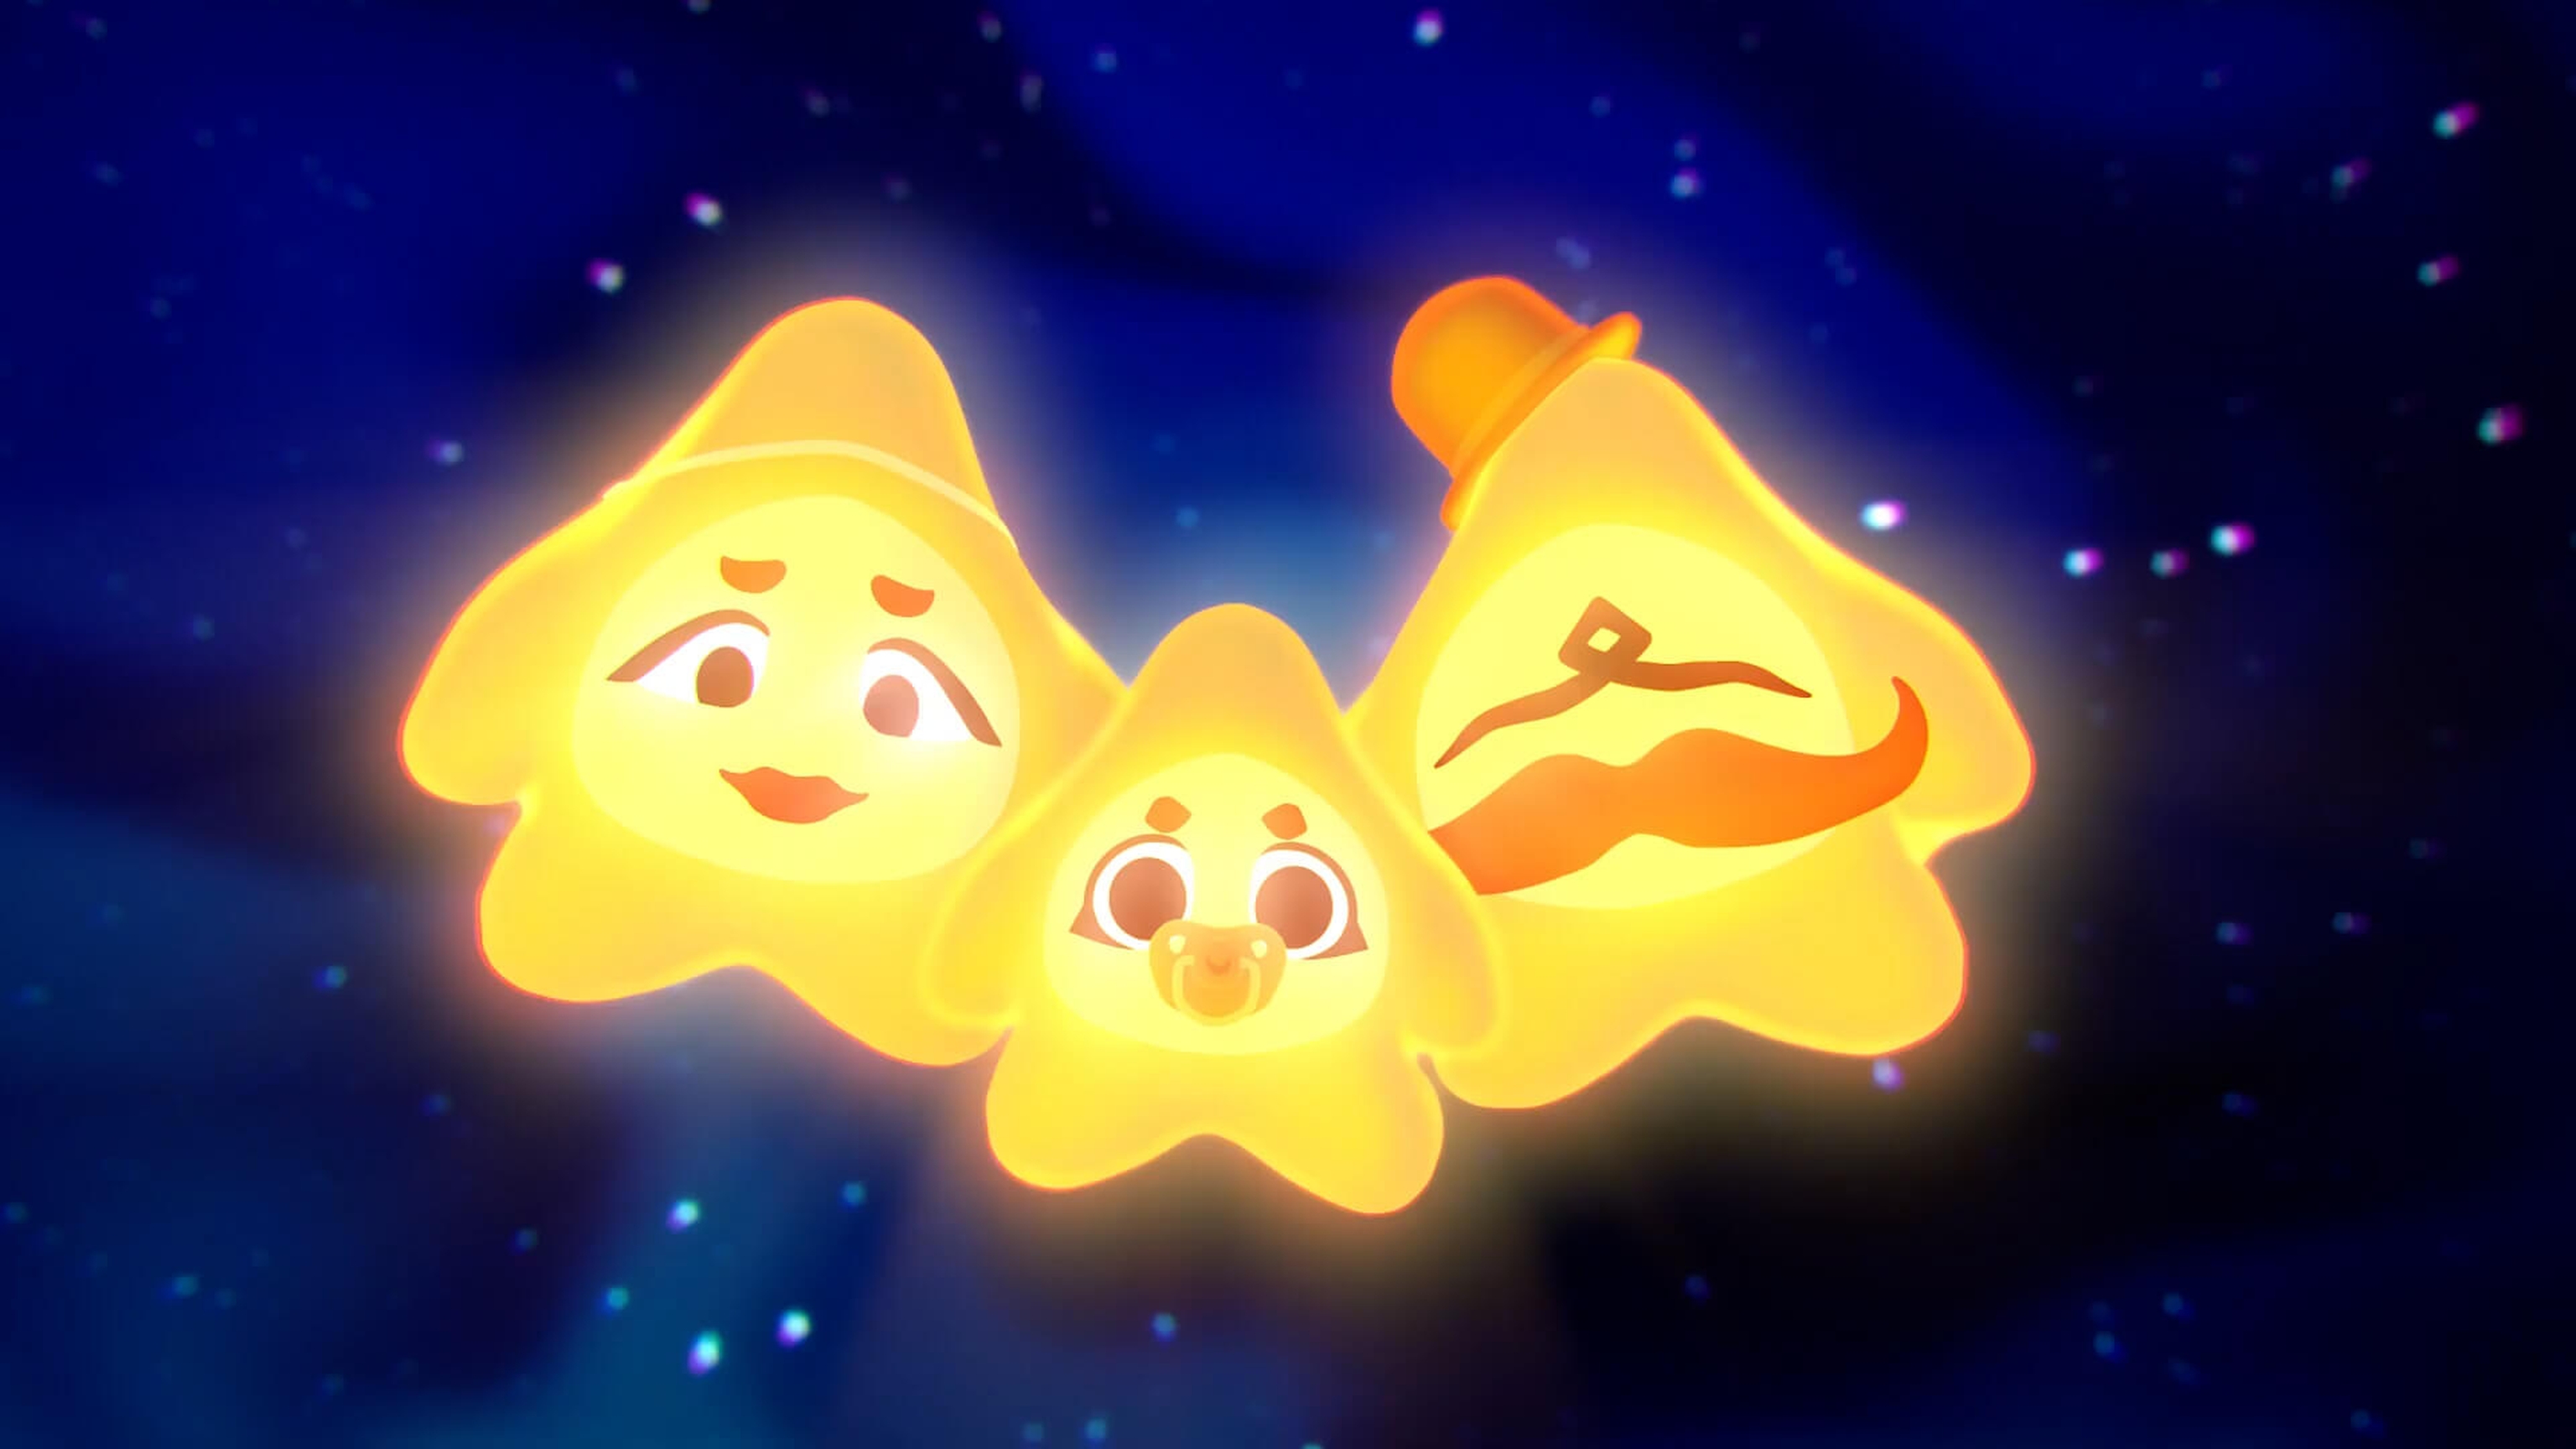 Three animated star fish characters in the night sky